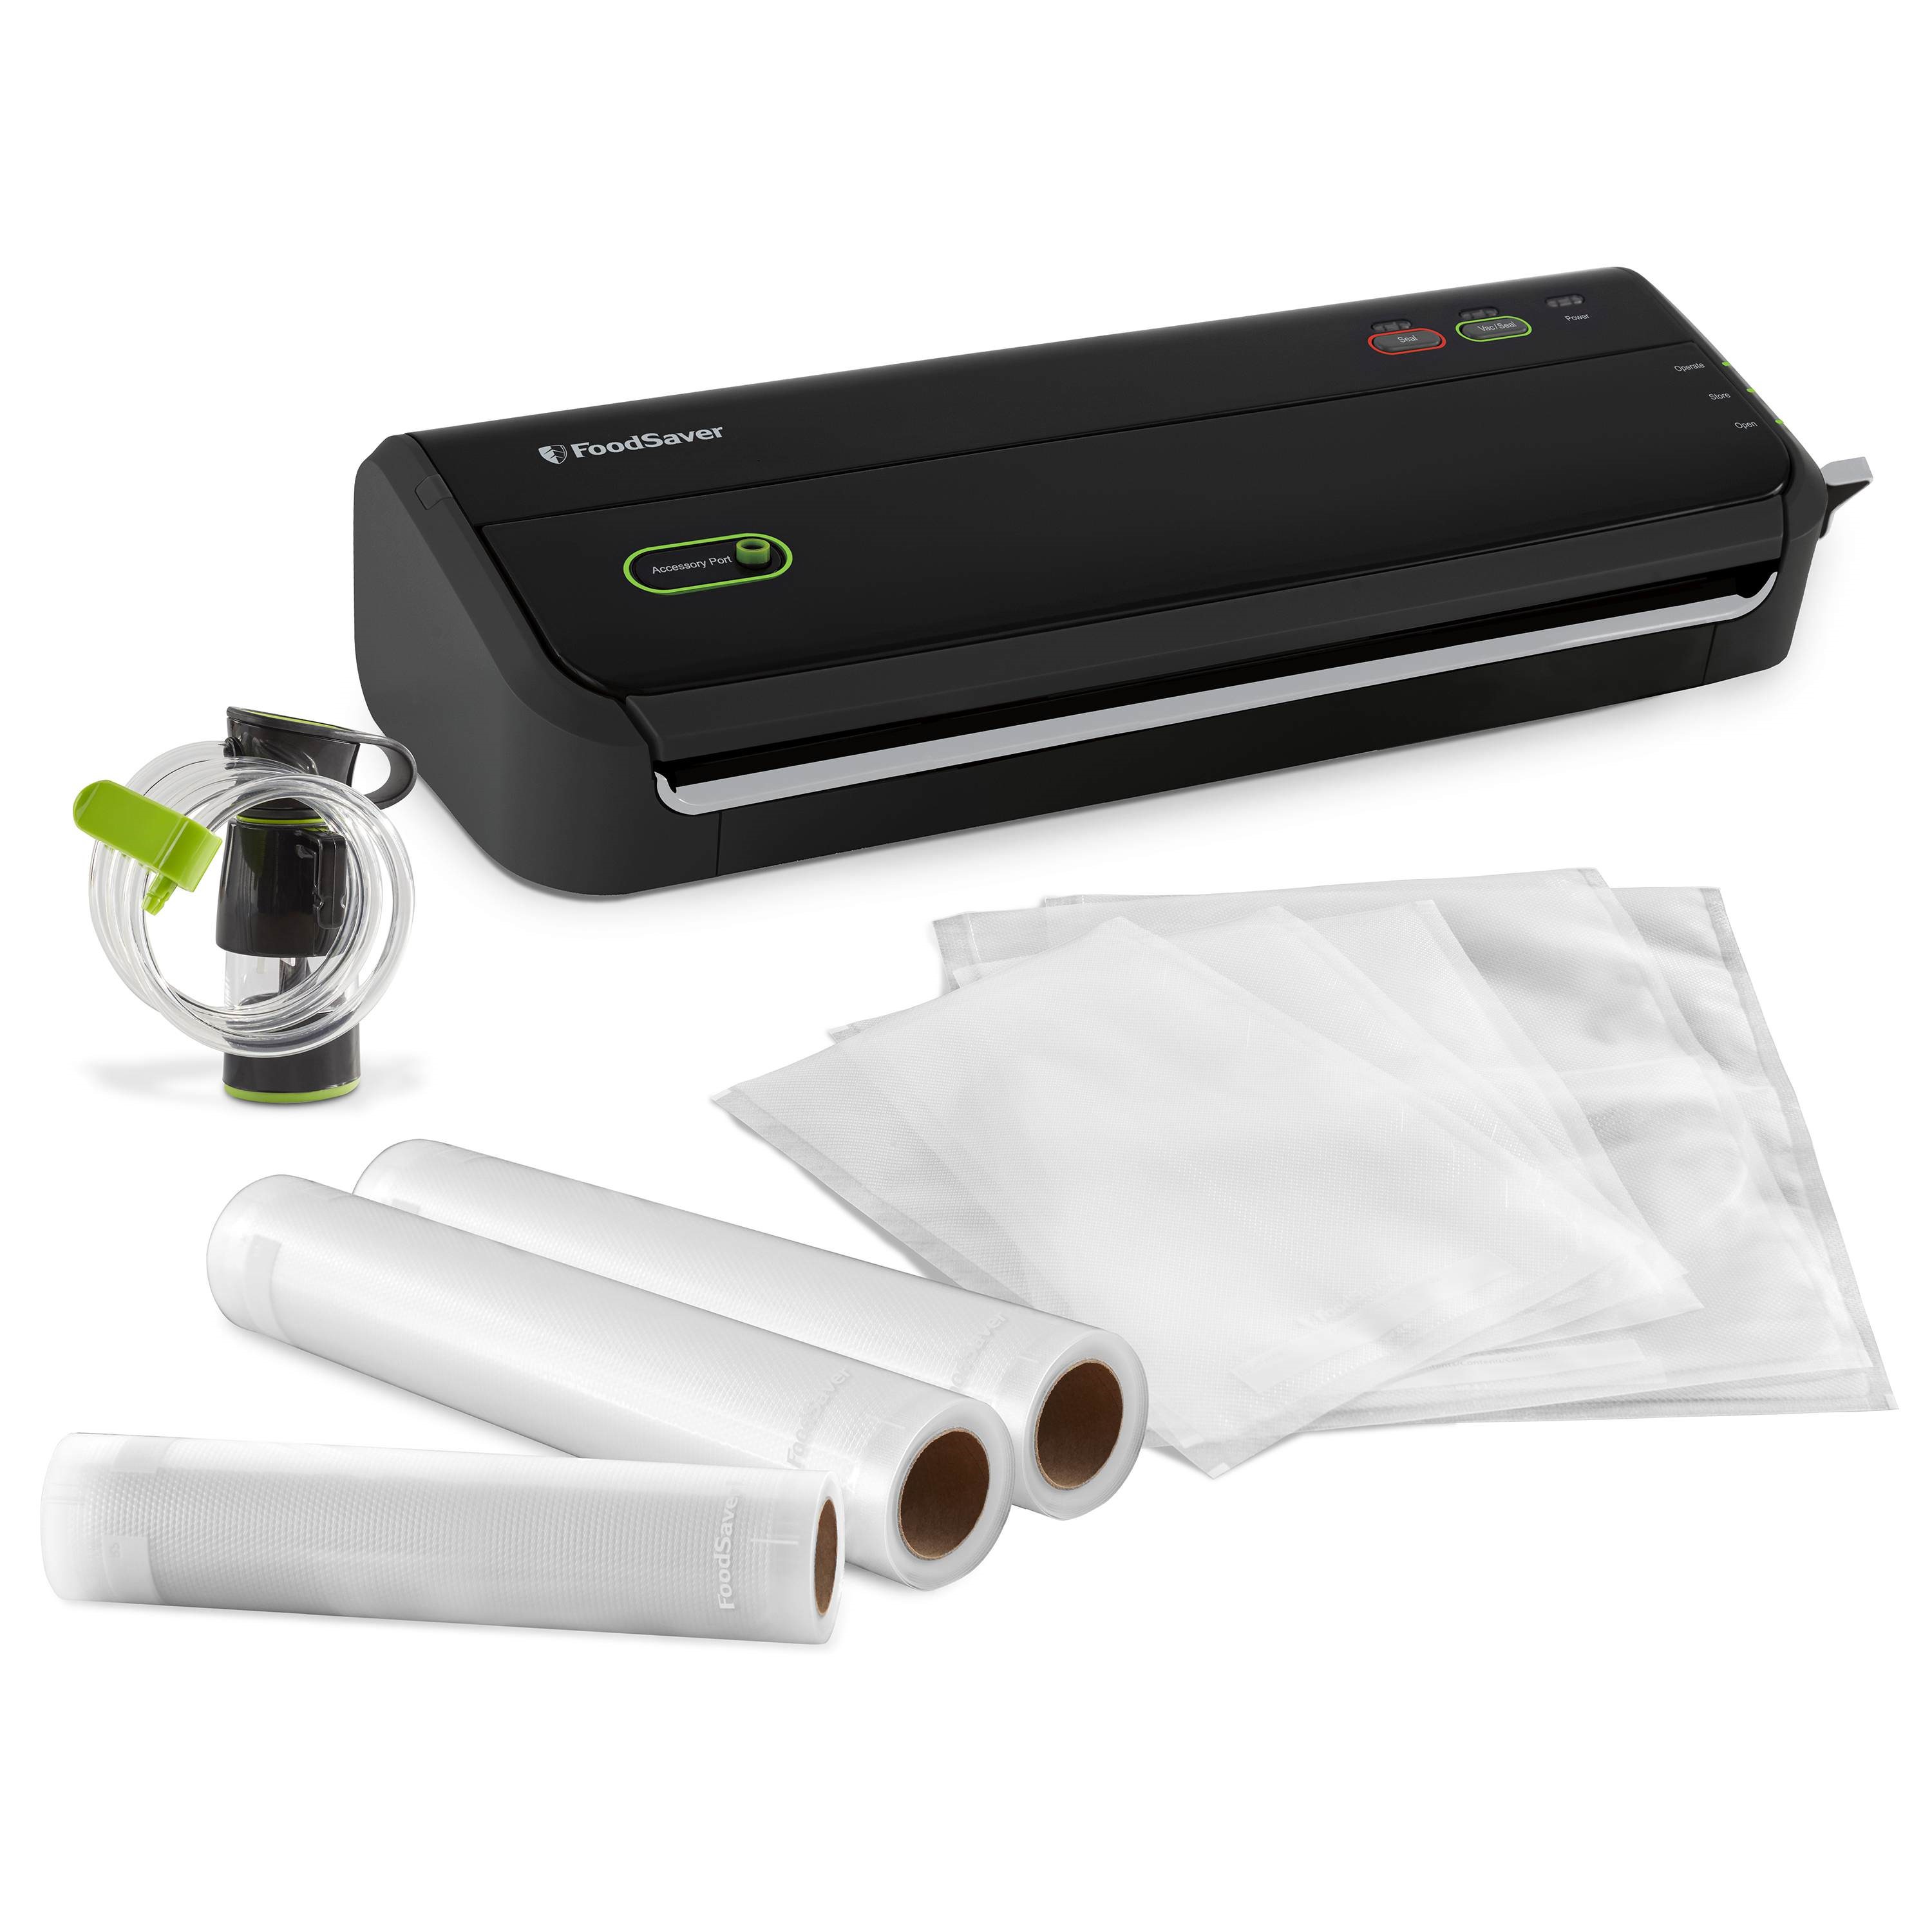 FoodSaver FM2000 Manual Vacuum Sealing System Value Bundle with Bags and Hose - image 1 of 12